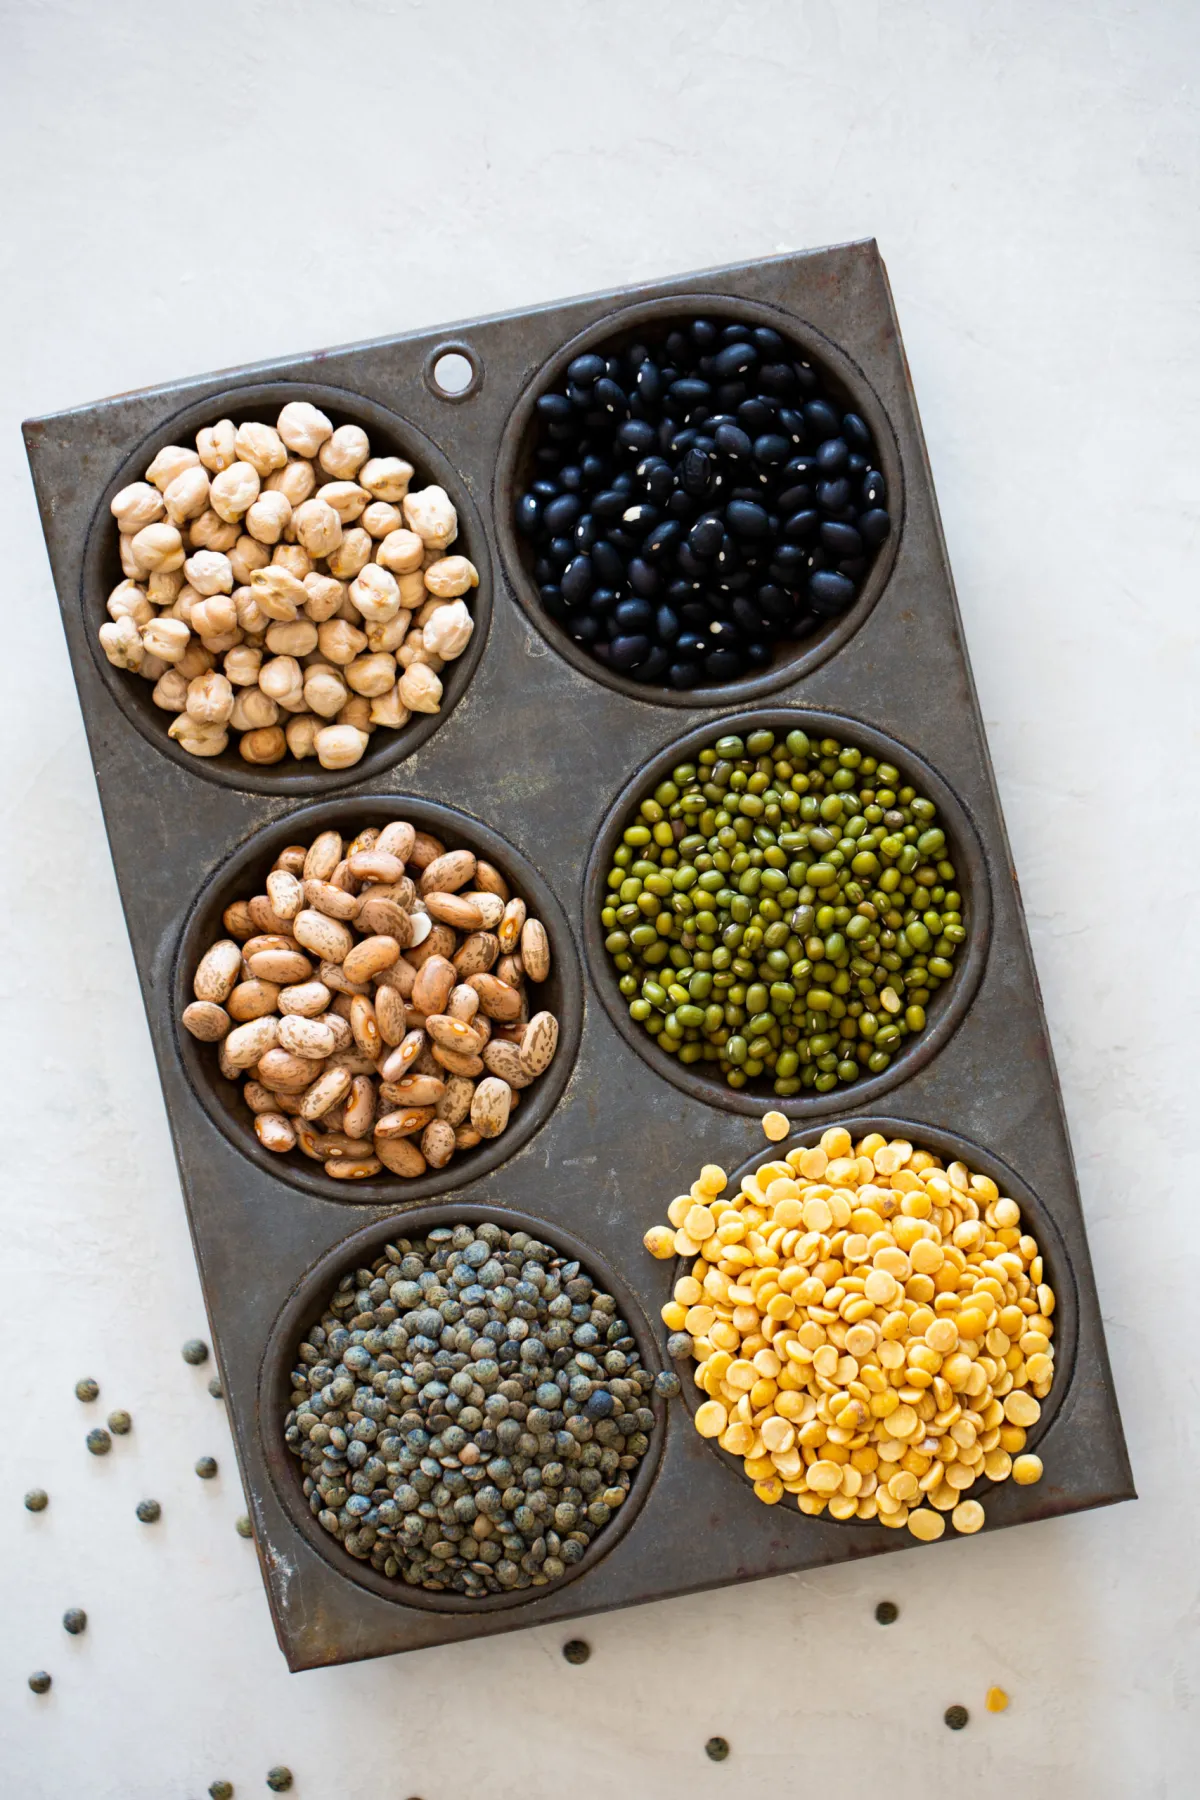 A metal pan filled with 25 essential vegan pantry ingredients including black beans, peas, and lentils.